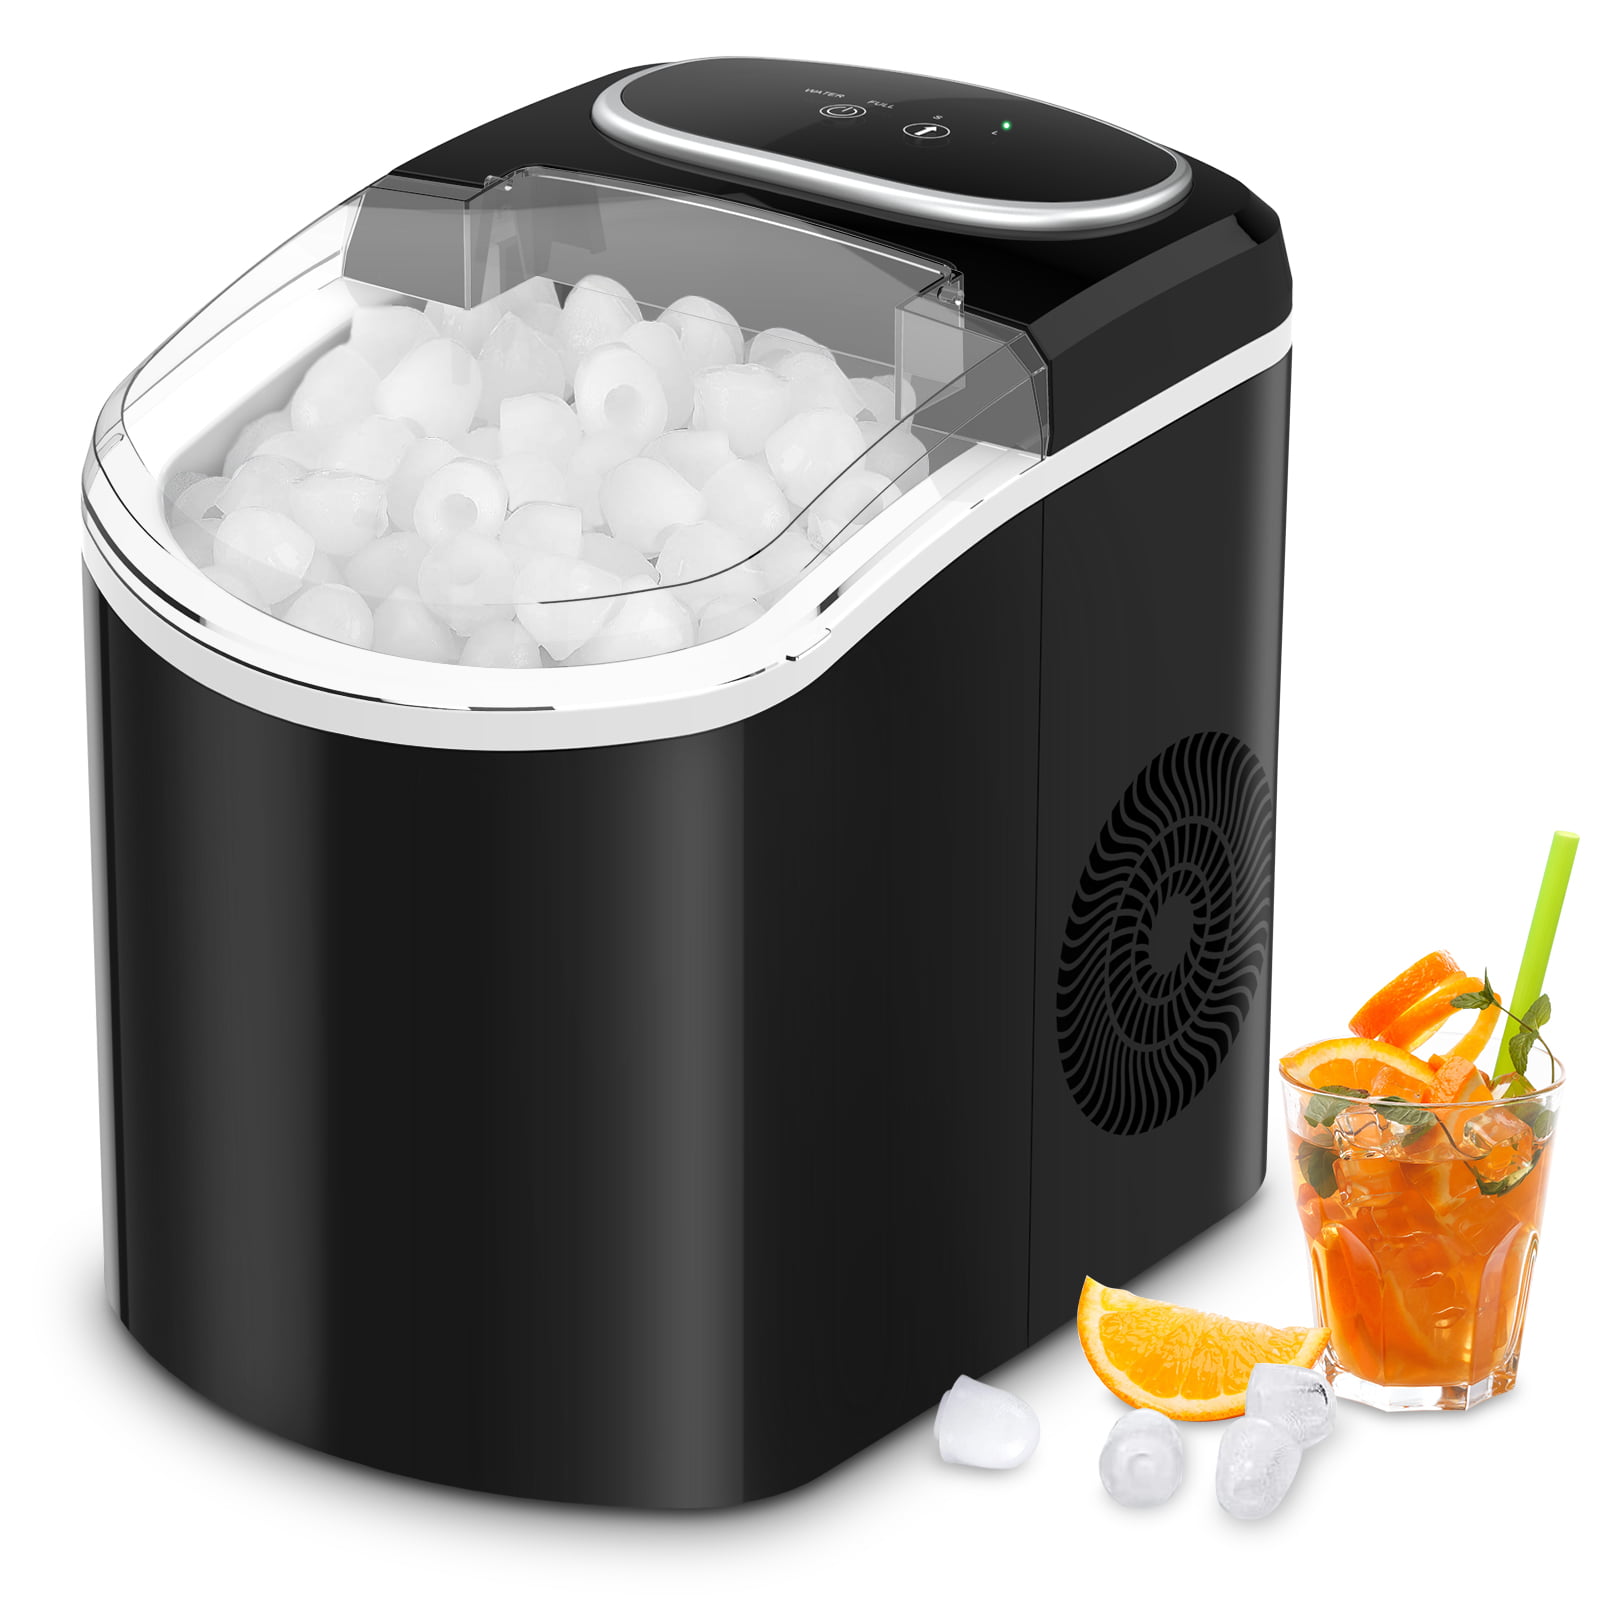 LifePlus Ice Maker Portable Countertop 26LBS Bullet Ice Cube Self Cleaning  for Home Kitchen, Black 